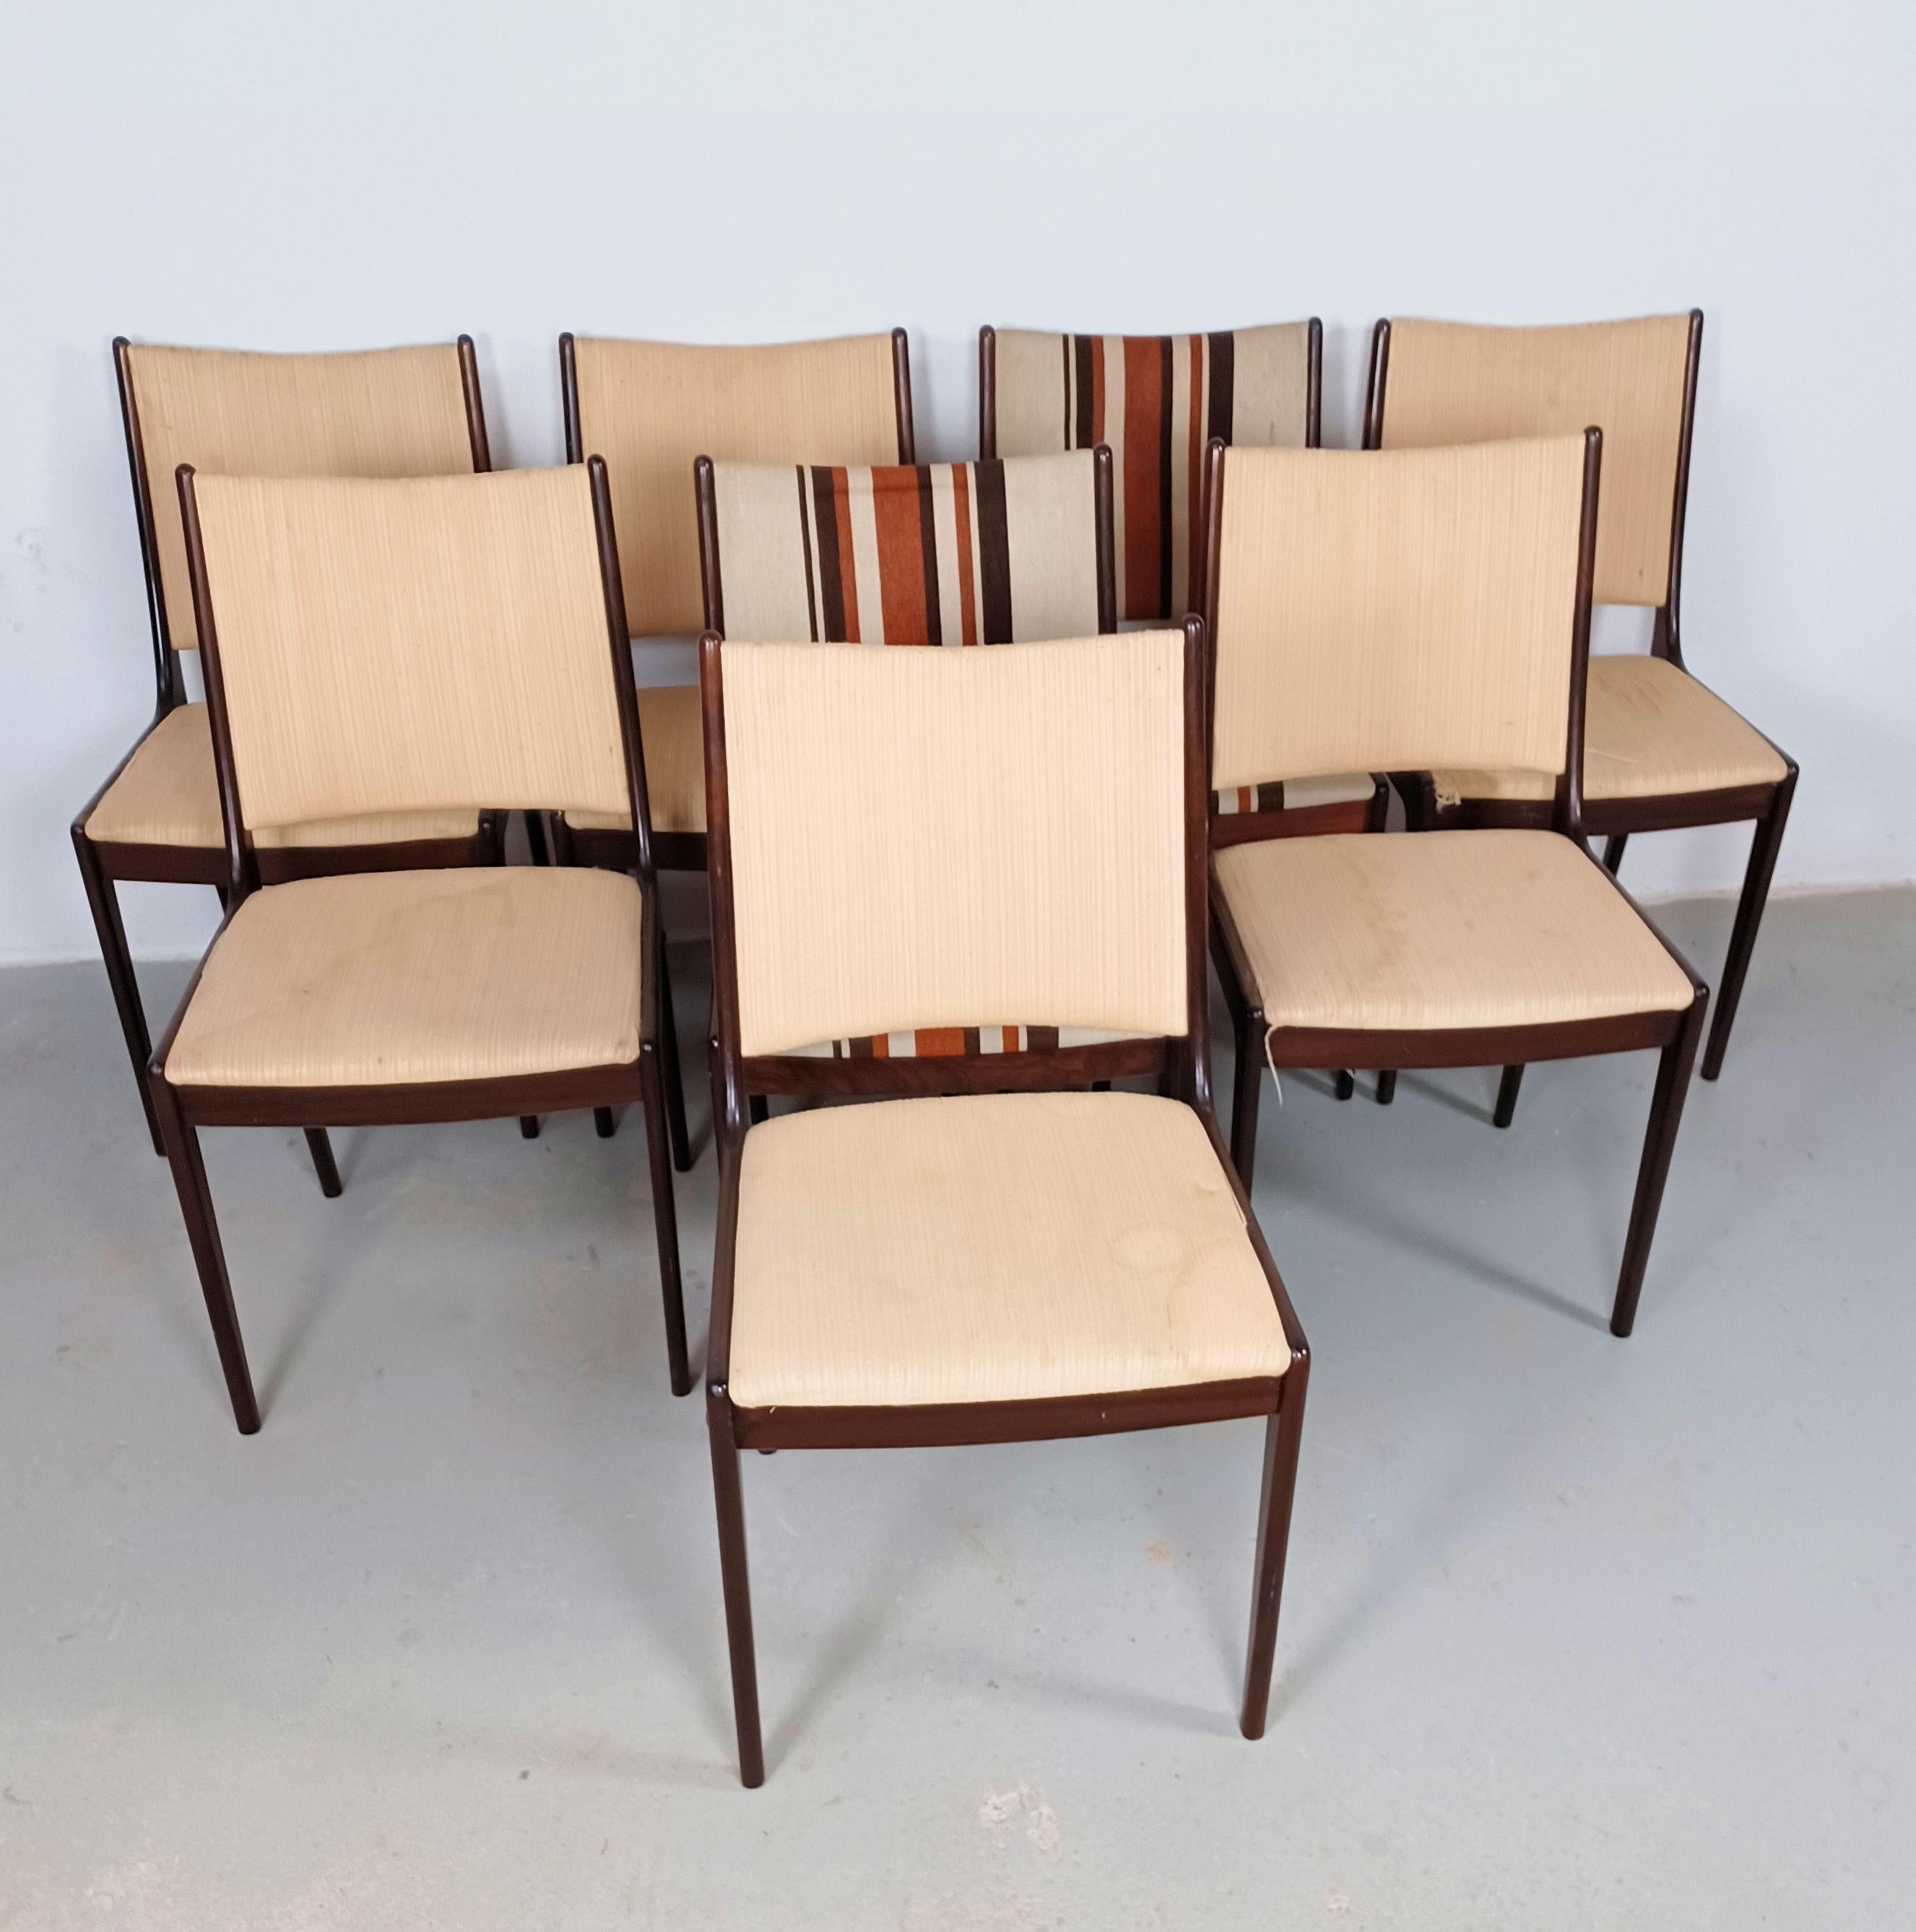 Set of Eight restored 1960s Johannes Andersen dining chairs in mahogany made by Uldum Møbler, Denmark including custom reupholstery.

The set of dining chairs feature a clean simple yet elegant design that will fit in well in many settings. 

The